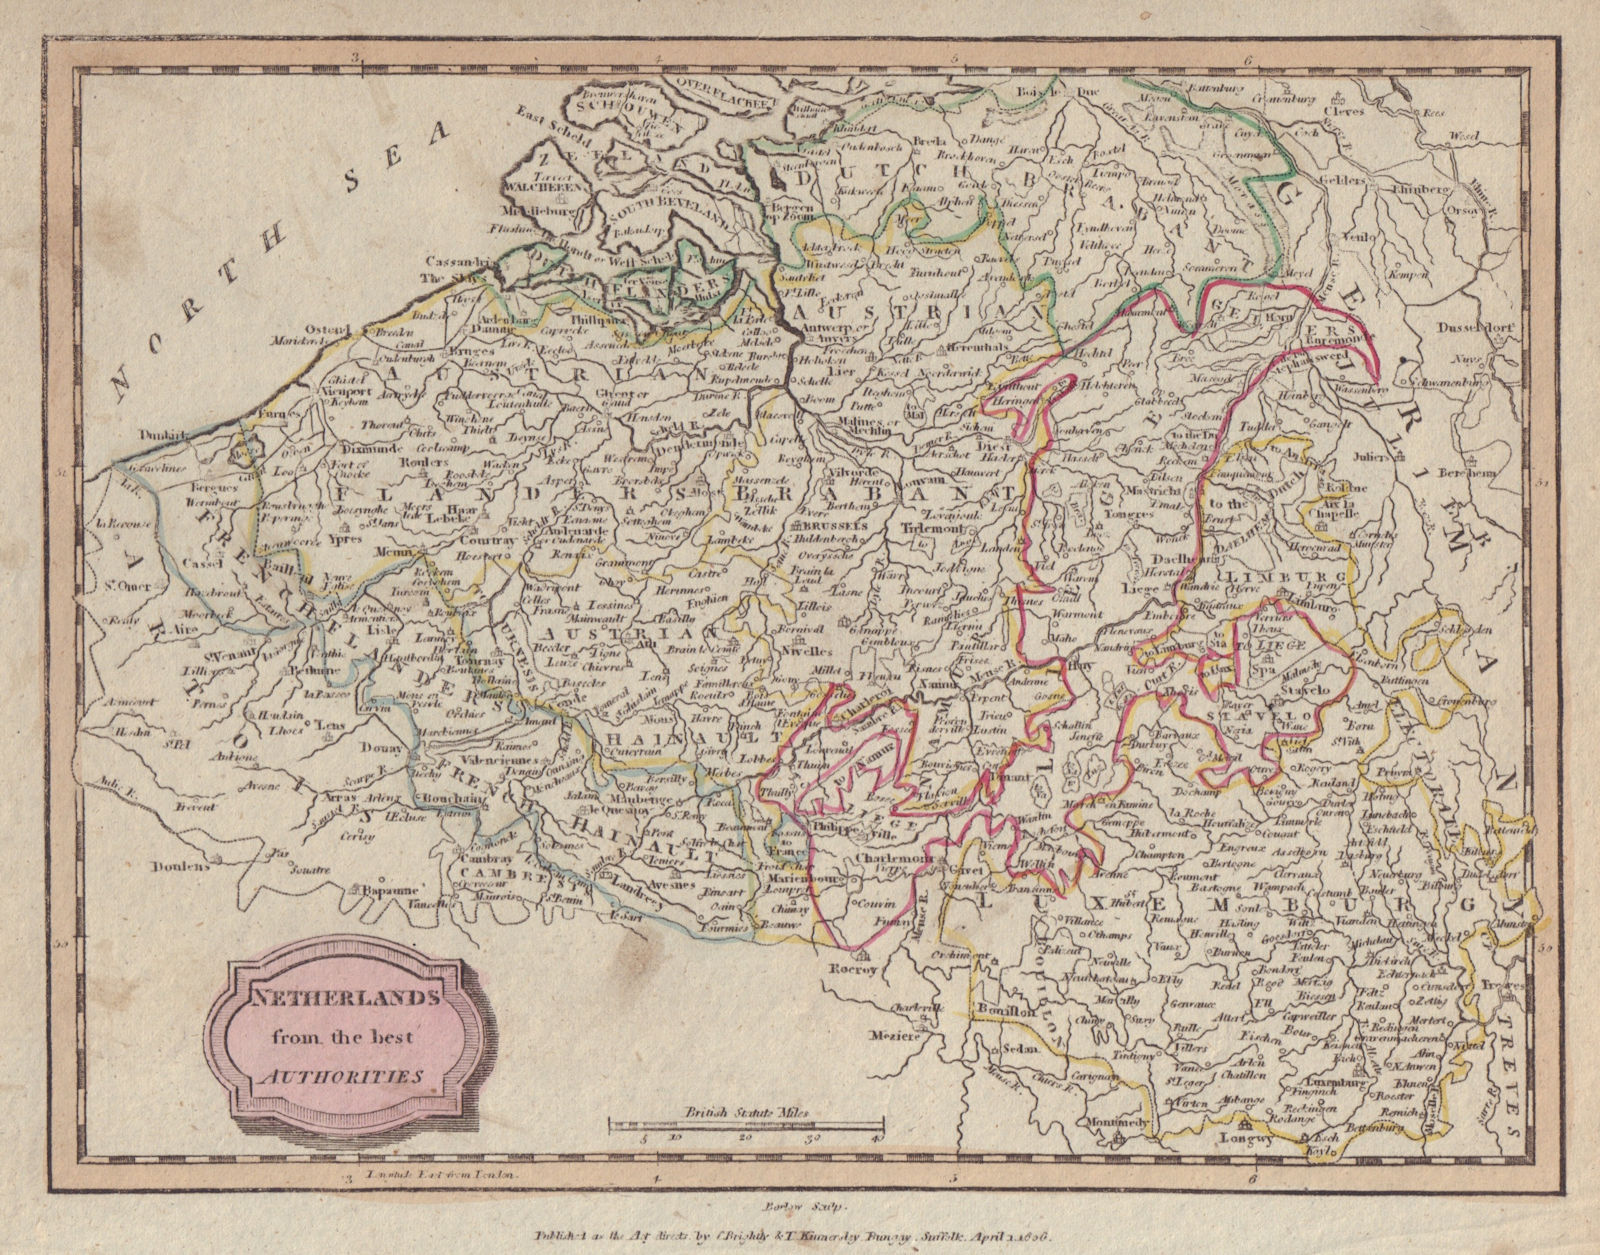 Associate Product Belgium & Luxembourg. "Netherlands from the best authorities". BARLOW 1806 map